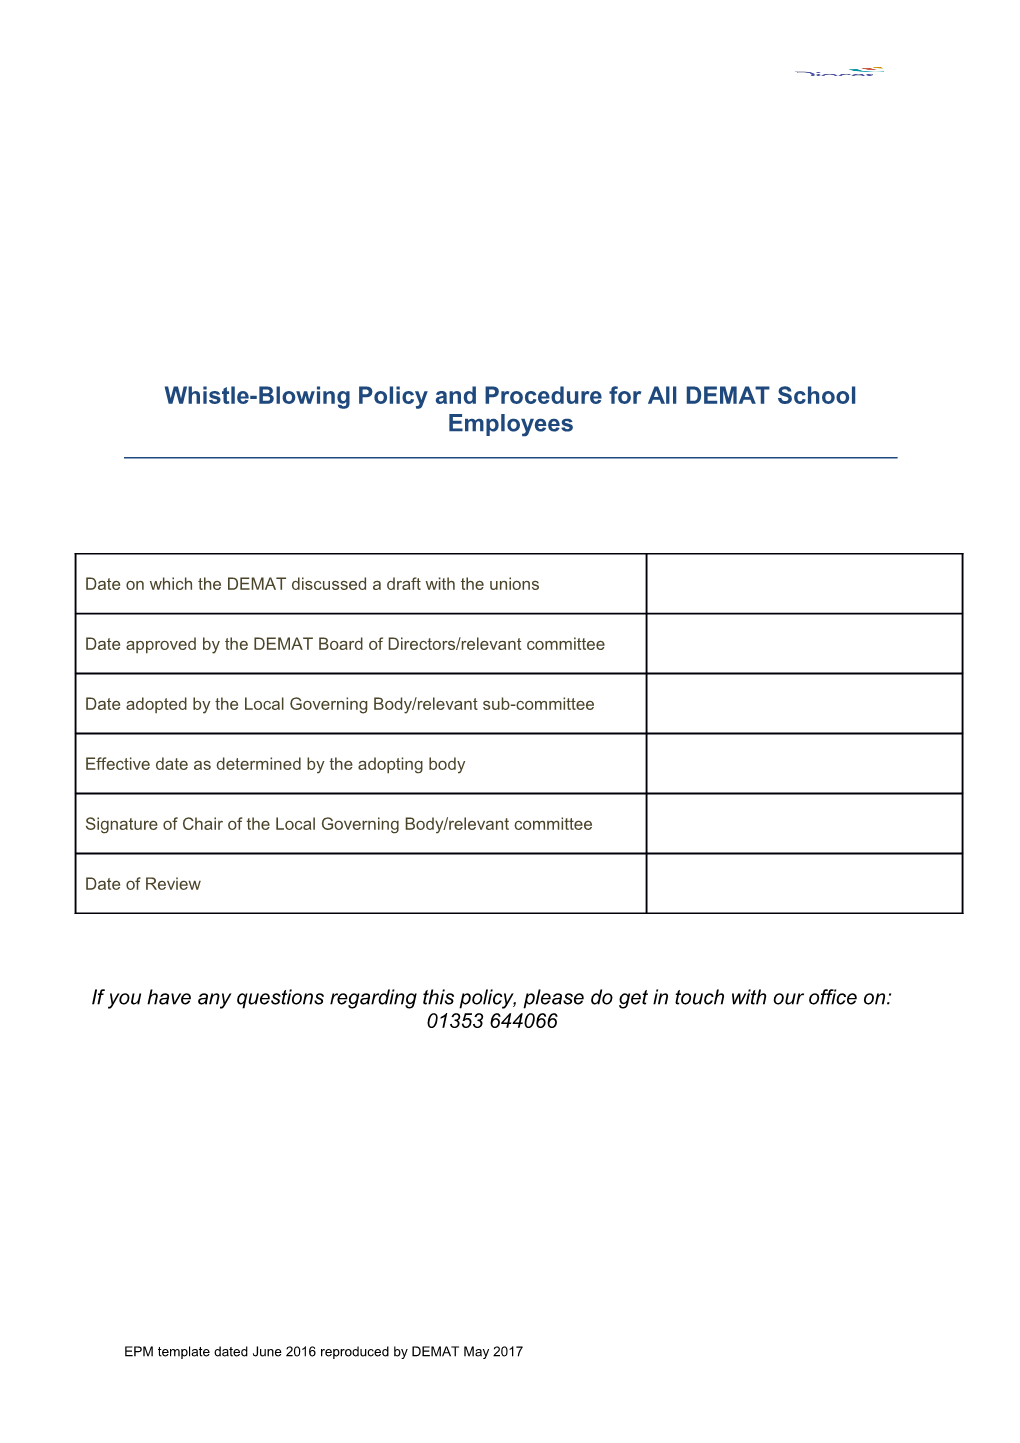 Whistle-Blowing Policy and Procedure for All DEMAT School Employees